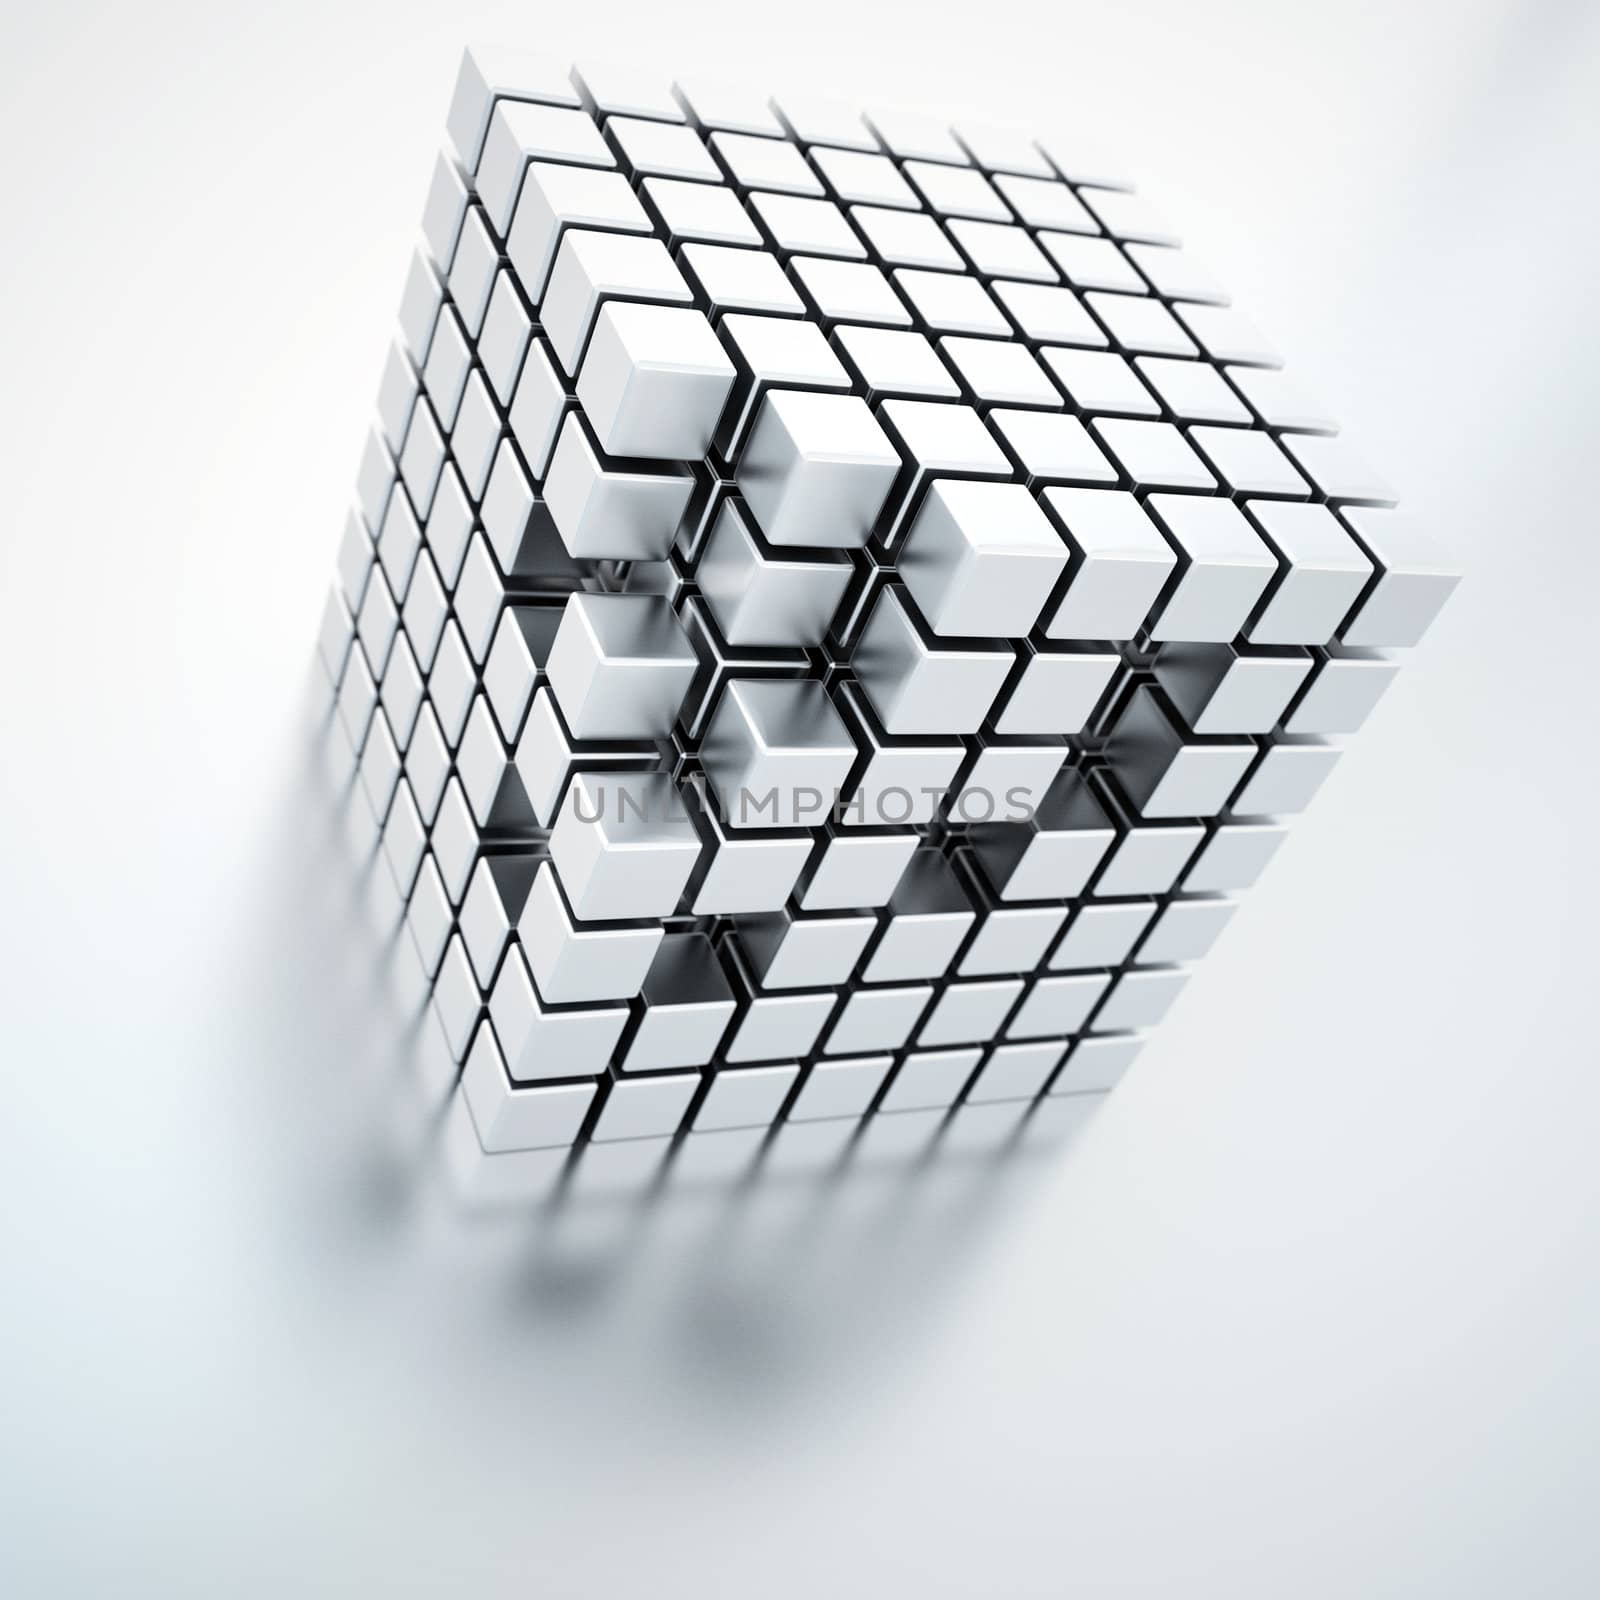 Abstract bright metallic cubes on a light background